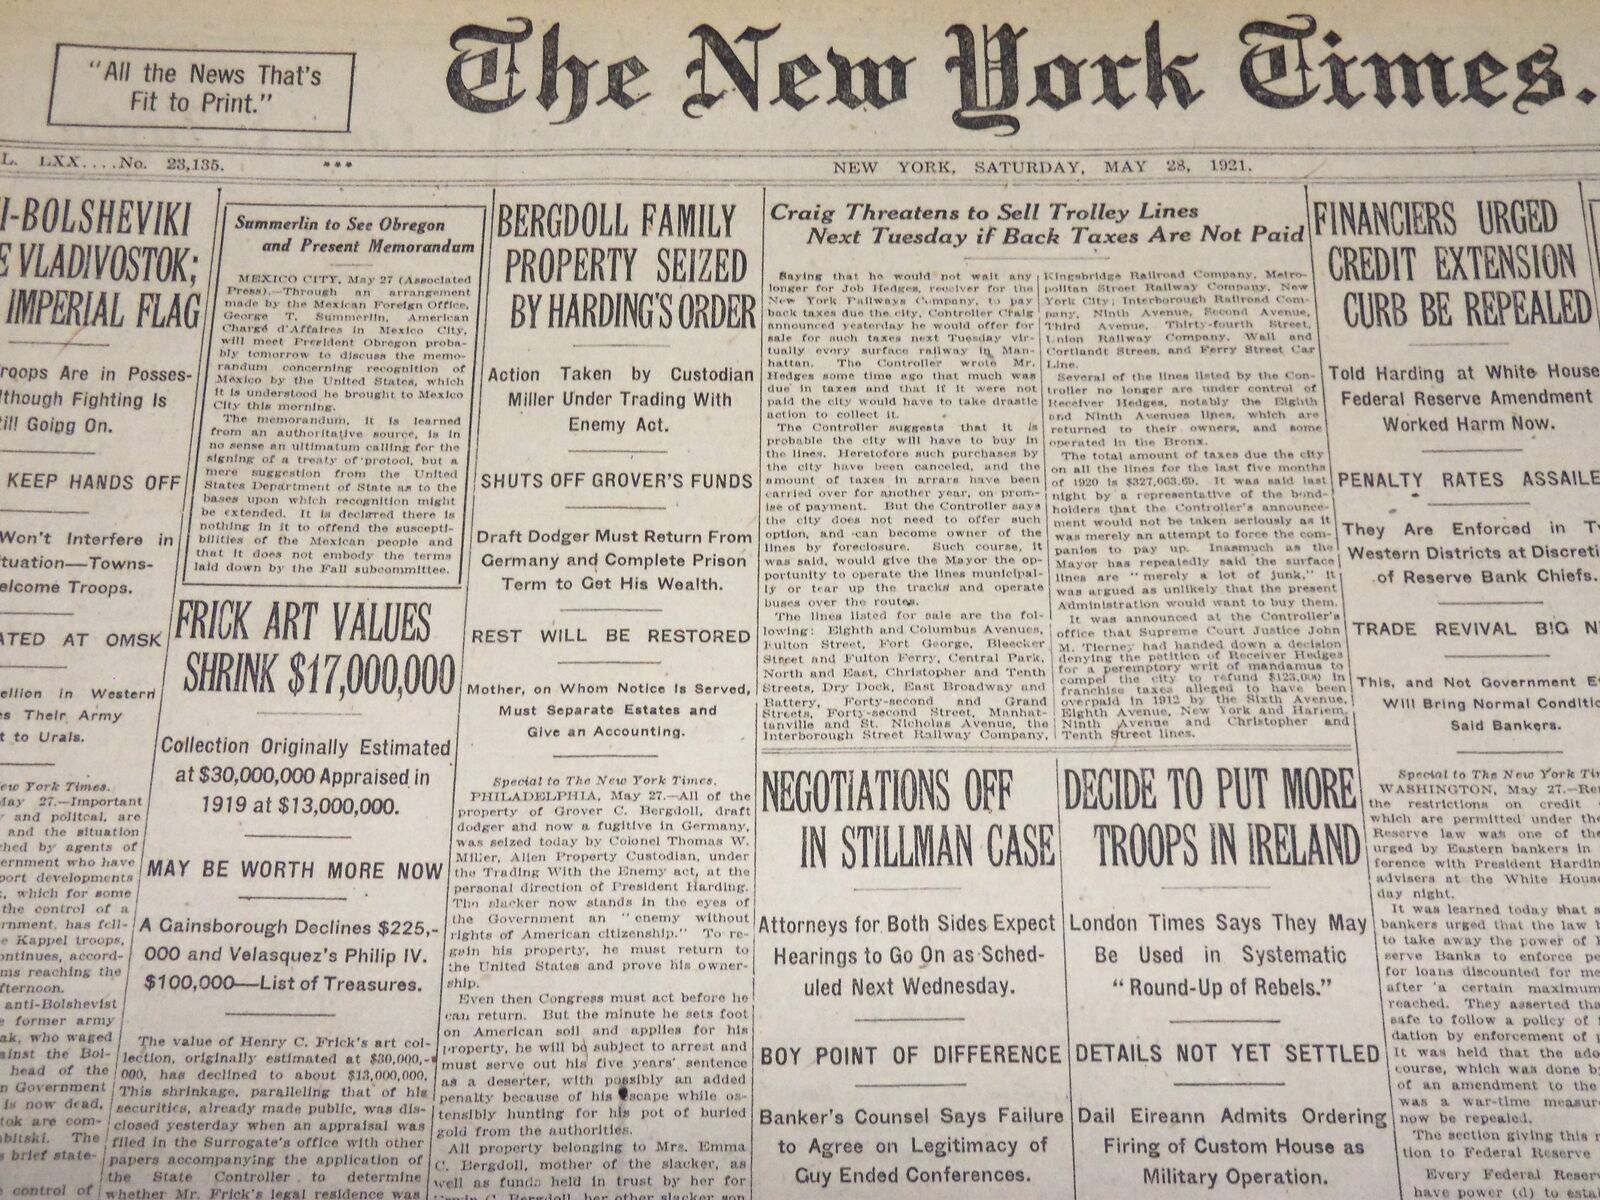 1921 MAY 28 NEW YORK TIMES - FRICK ART VALUES SHRINK $17,000,000 - NT 7855